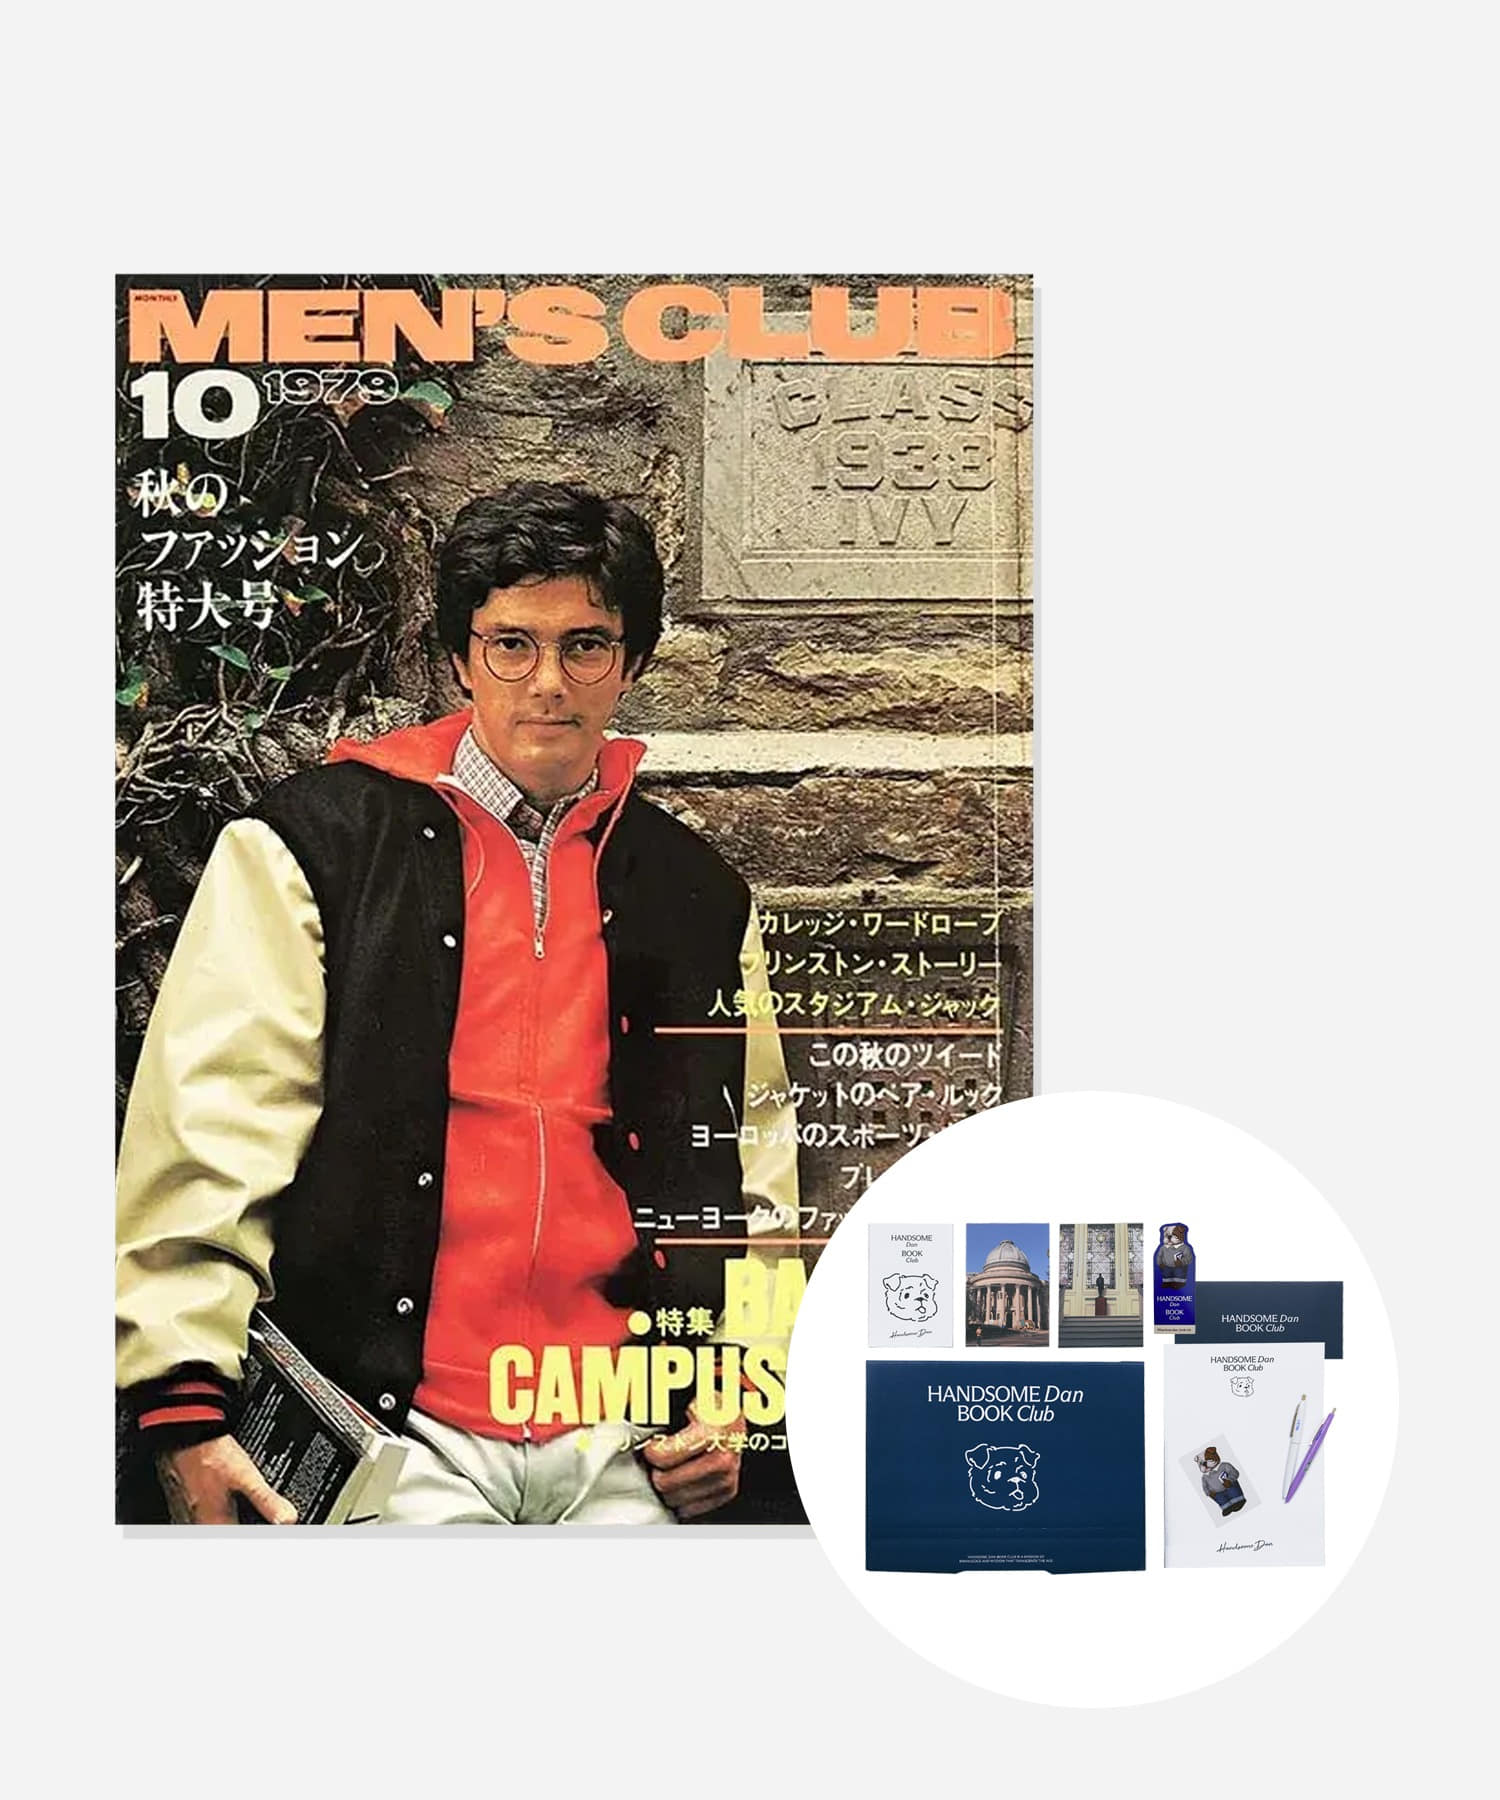 [MEN S CLUB 1979 BACK TO CAMPUS ISSUE] BOOK PACKAGE